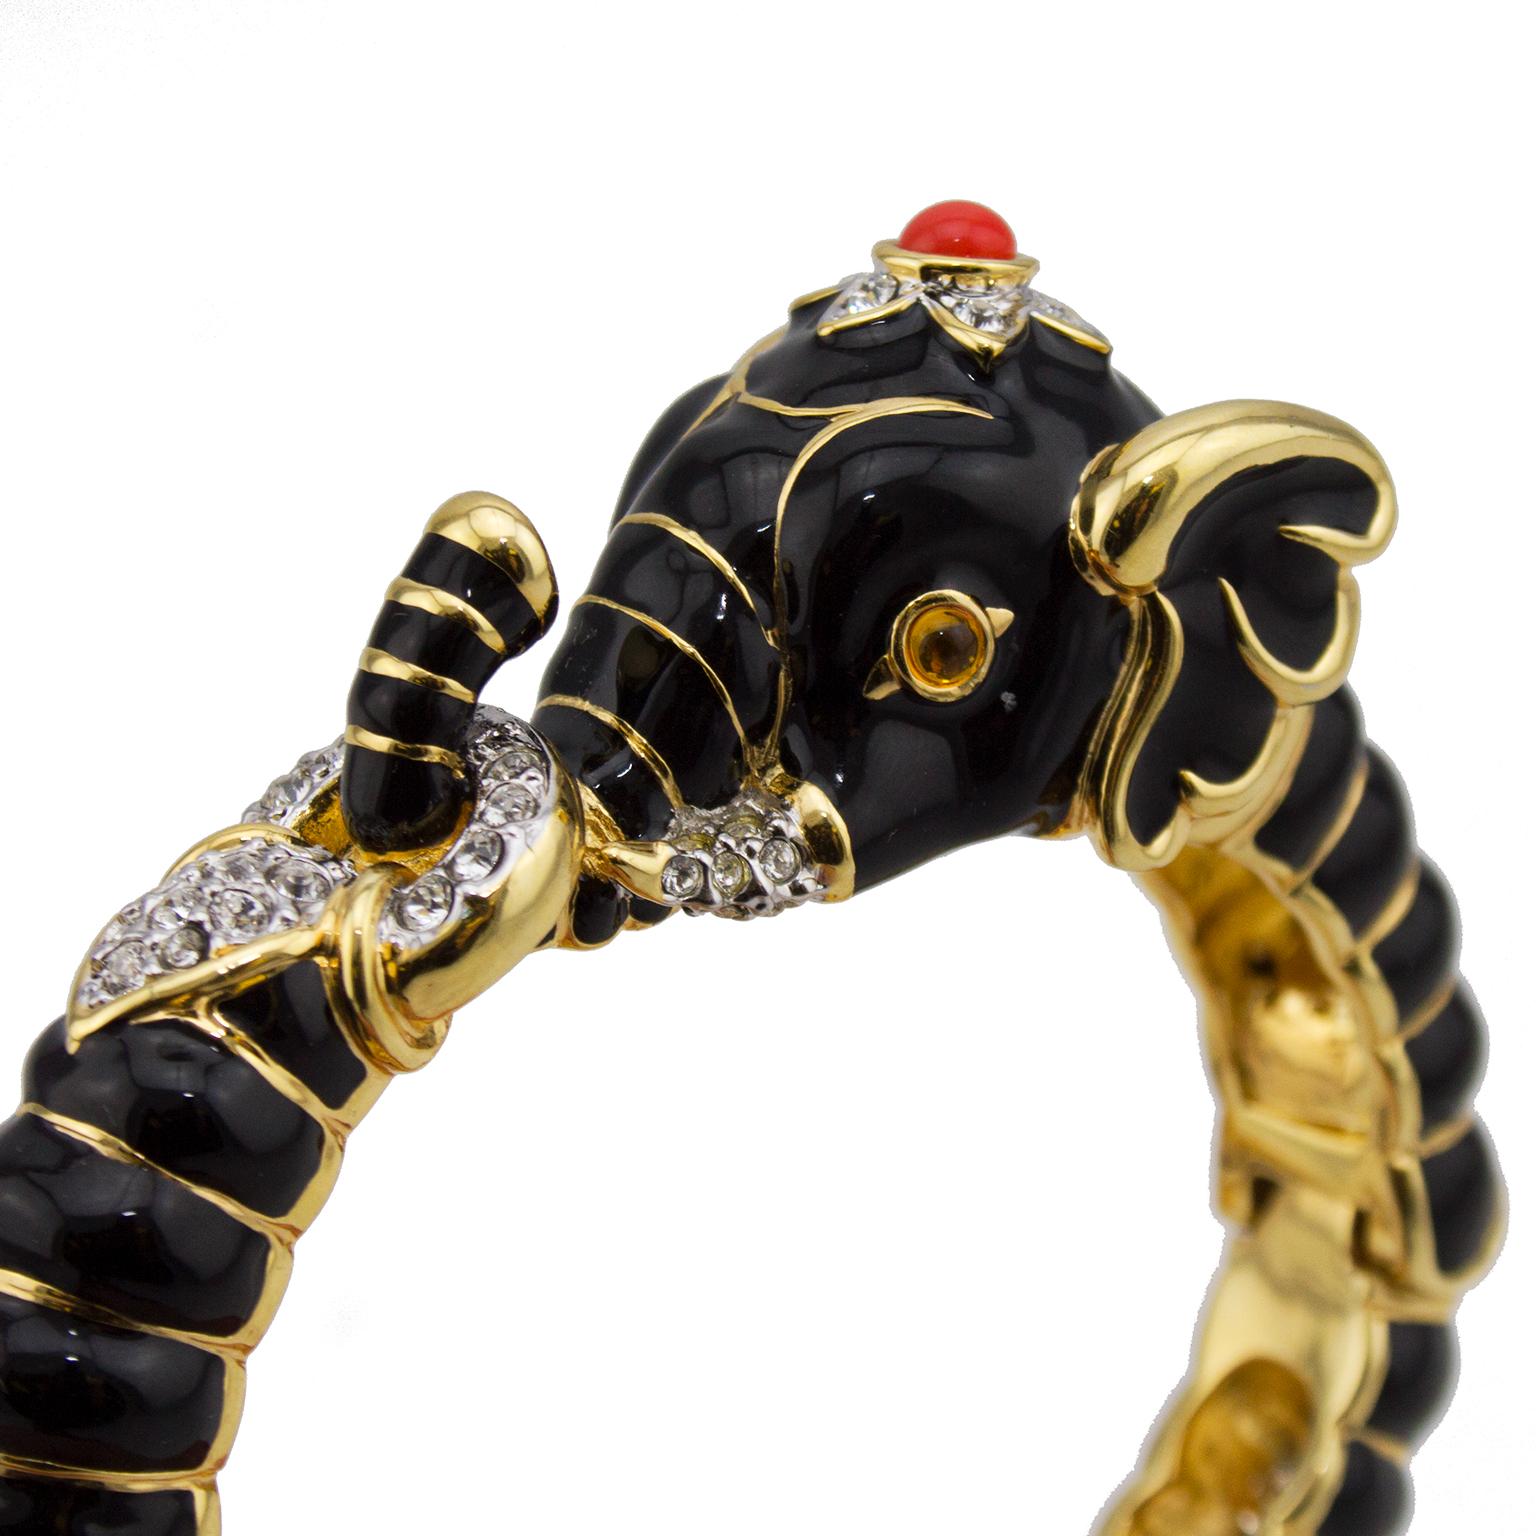 Gorgeous KJL black enamel and gold elephant shaped clamper bracelet with rhinestone and orange cabochon accent. This bracelet was produced in at least 6 different colors between the 1980s and the 1990s. The elephant features it's trunk hooked